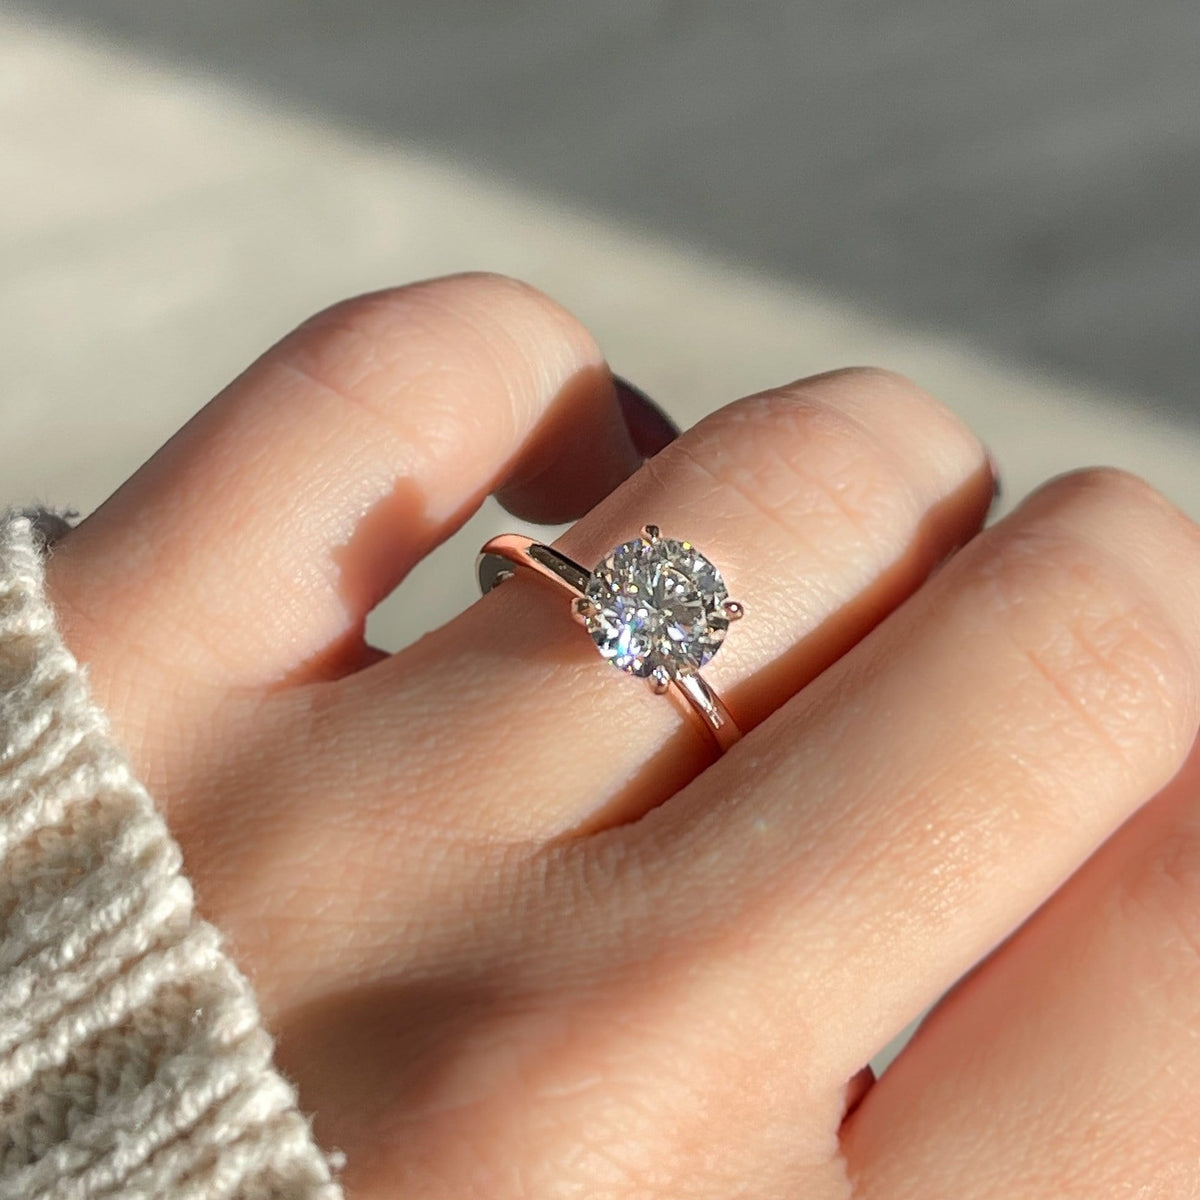 Best Engagement Ring For Hand Type and Size